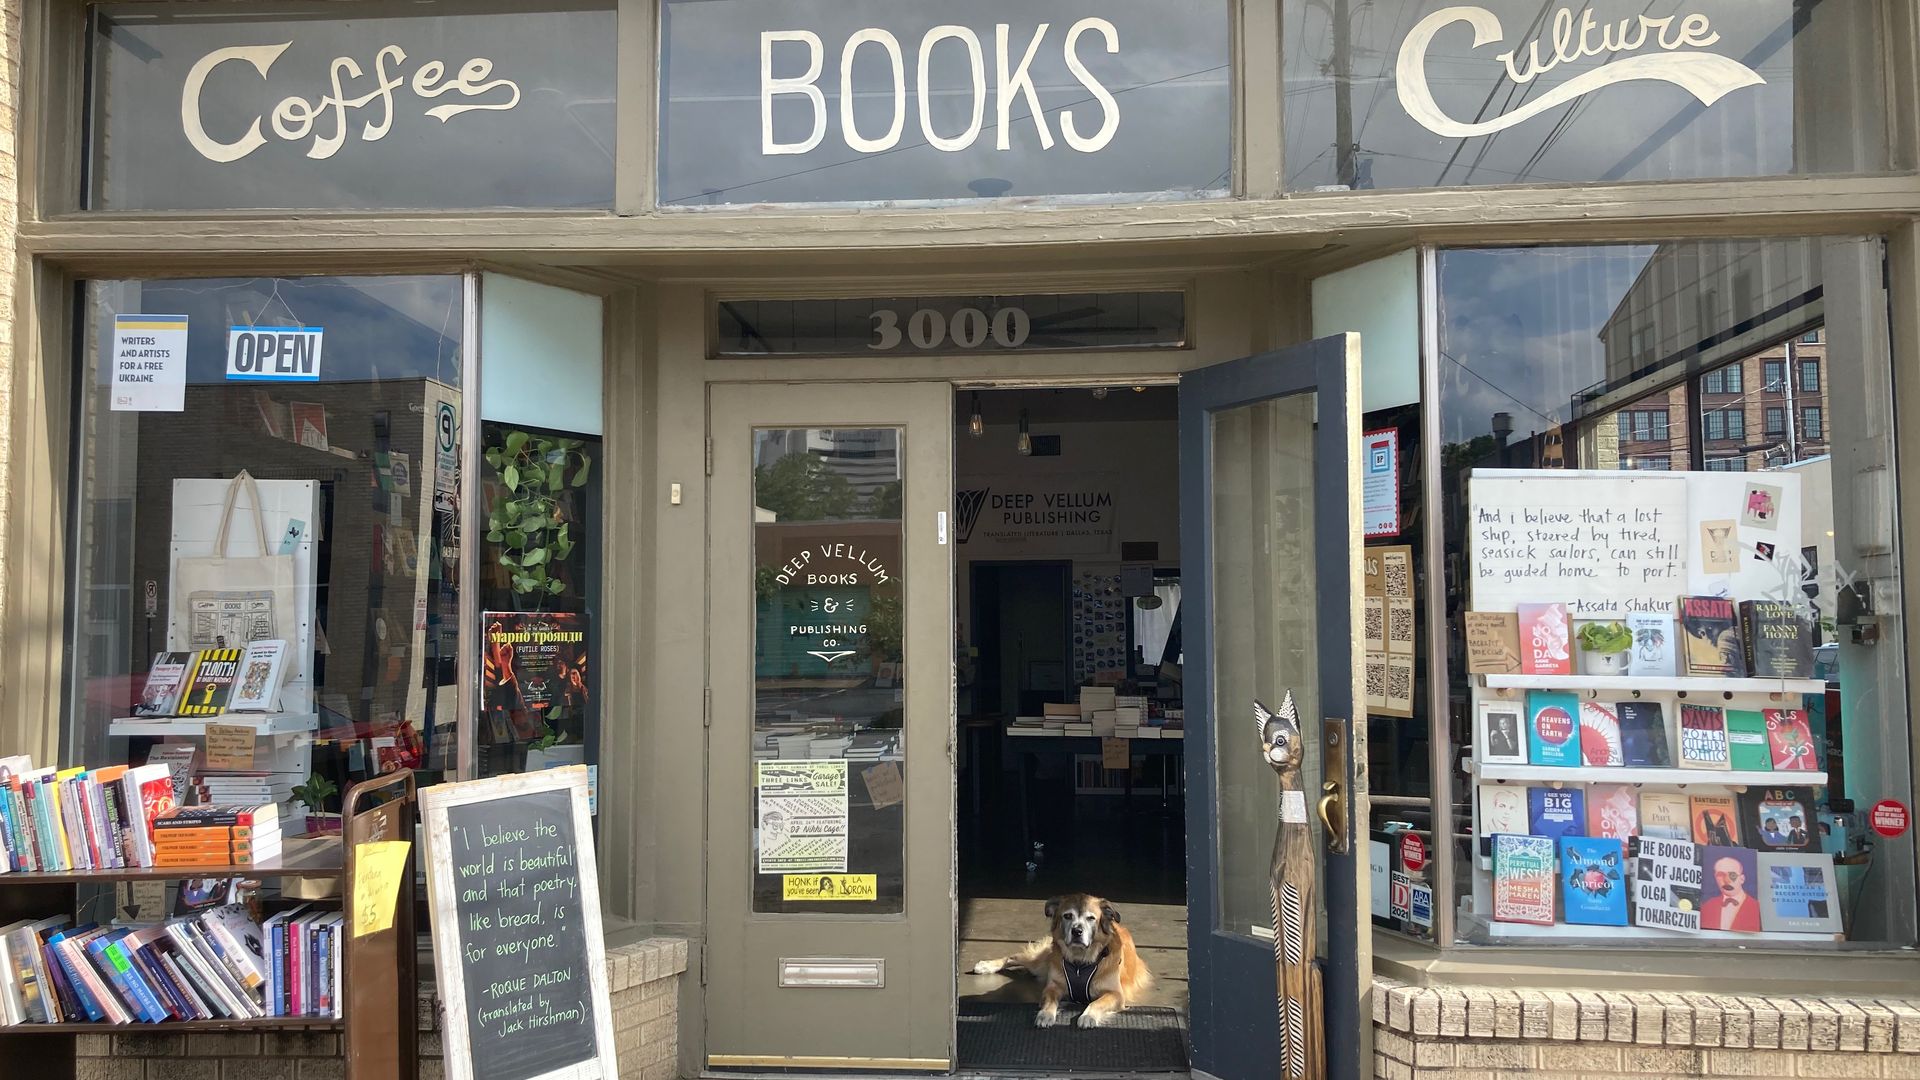 A gorgeous bookstore with a dog in the window